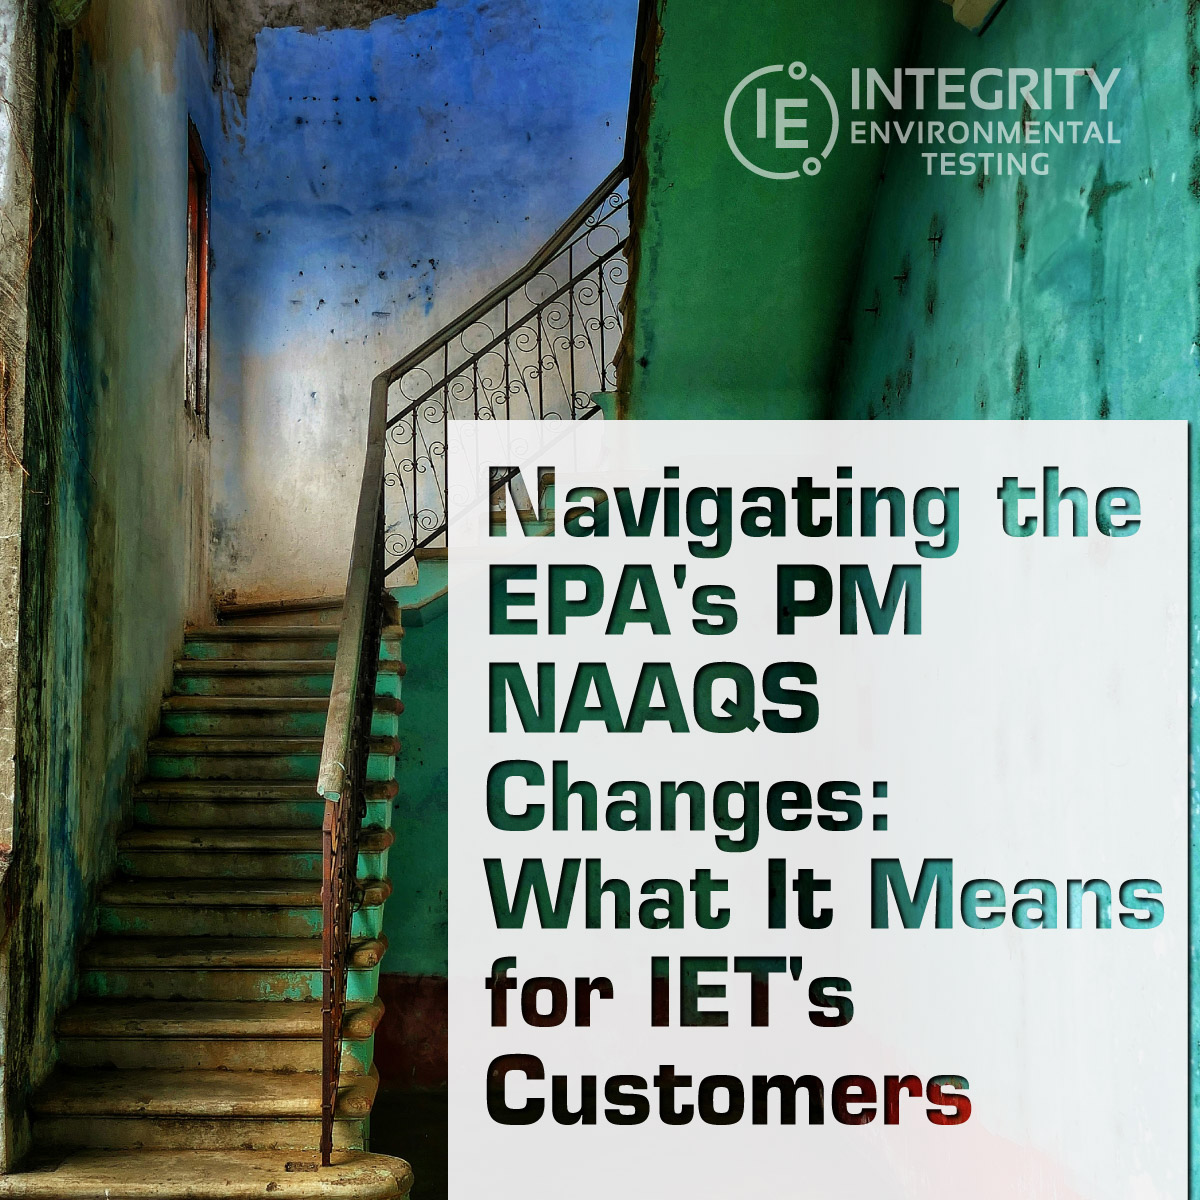 Navigating the EPA’s PM NAAQS Changes: What It Means for IET’s Customers